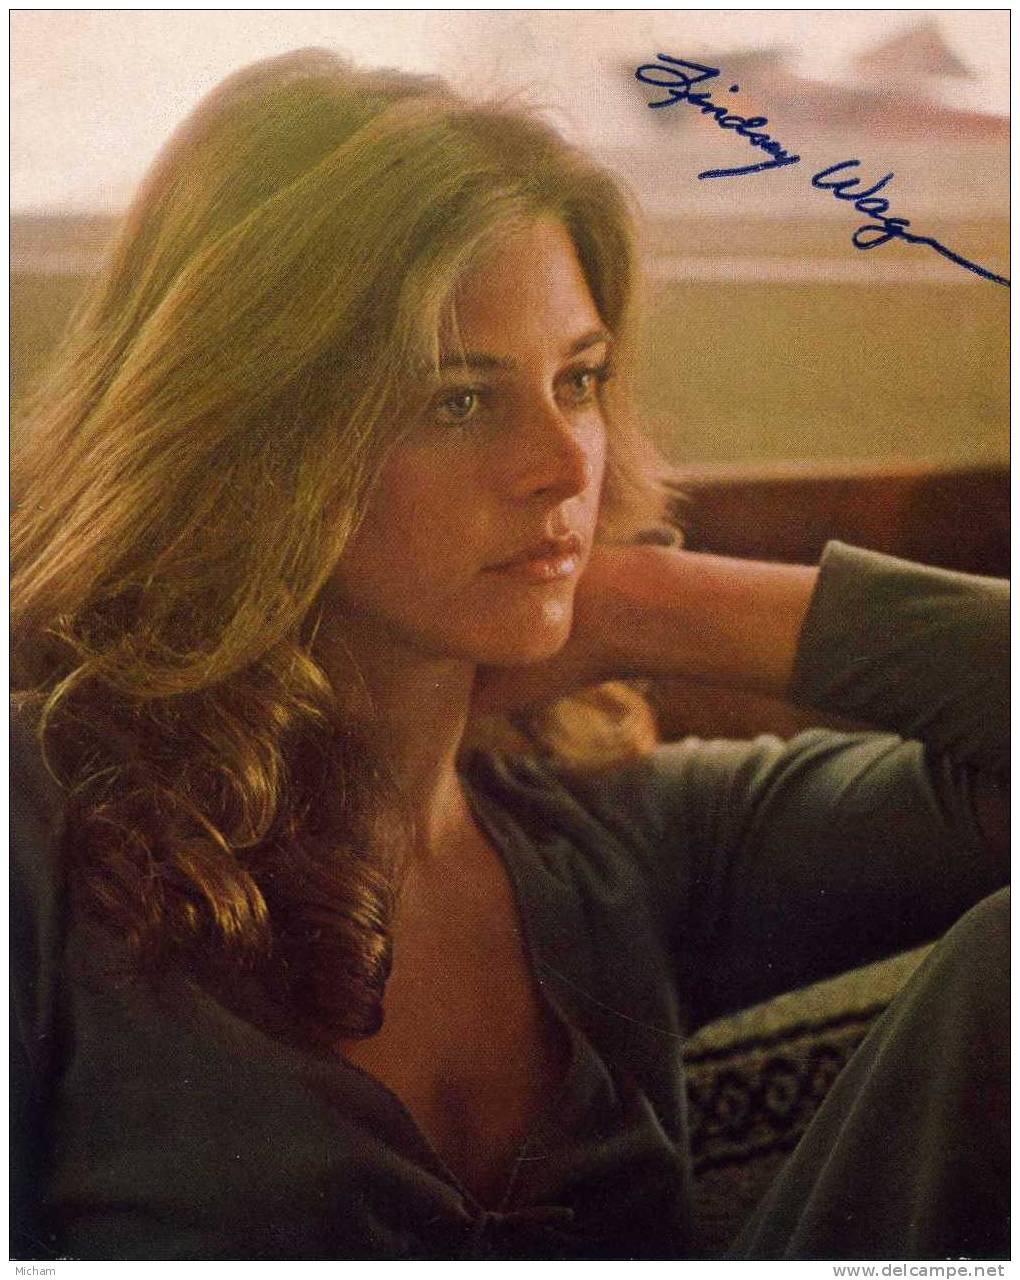 lindsay wagner quotes. 